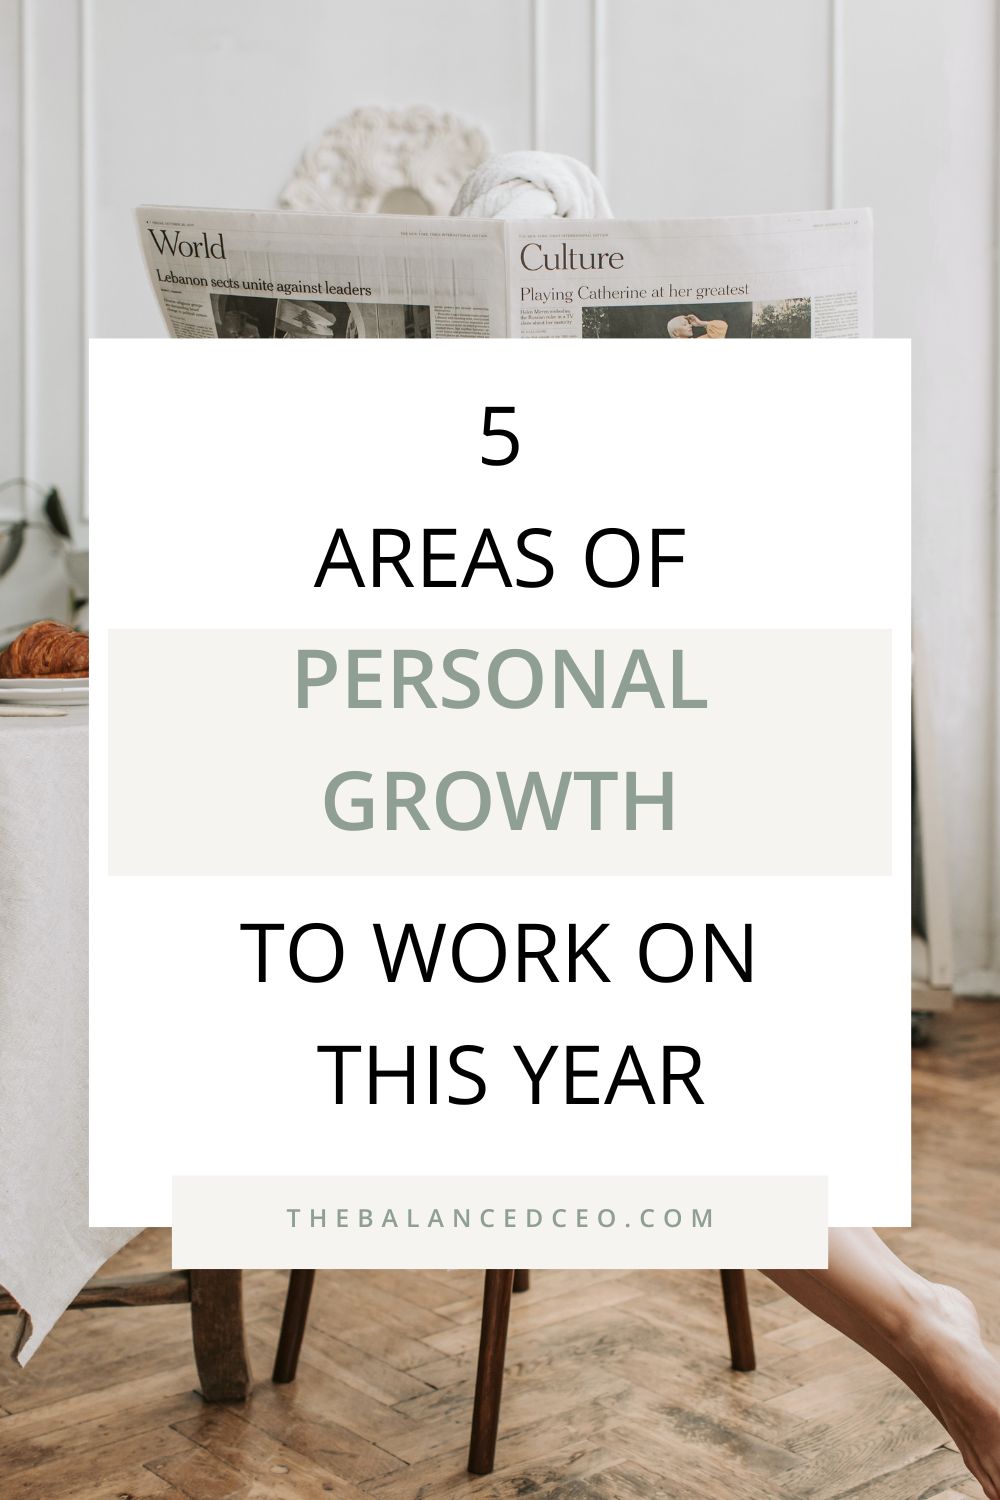 5 Areas of Personal Growth to Work on This Year